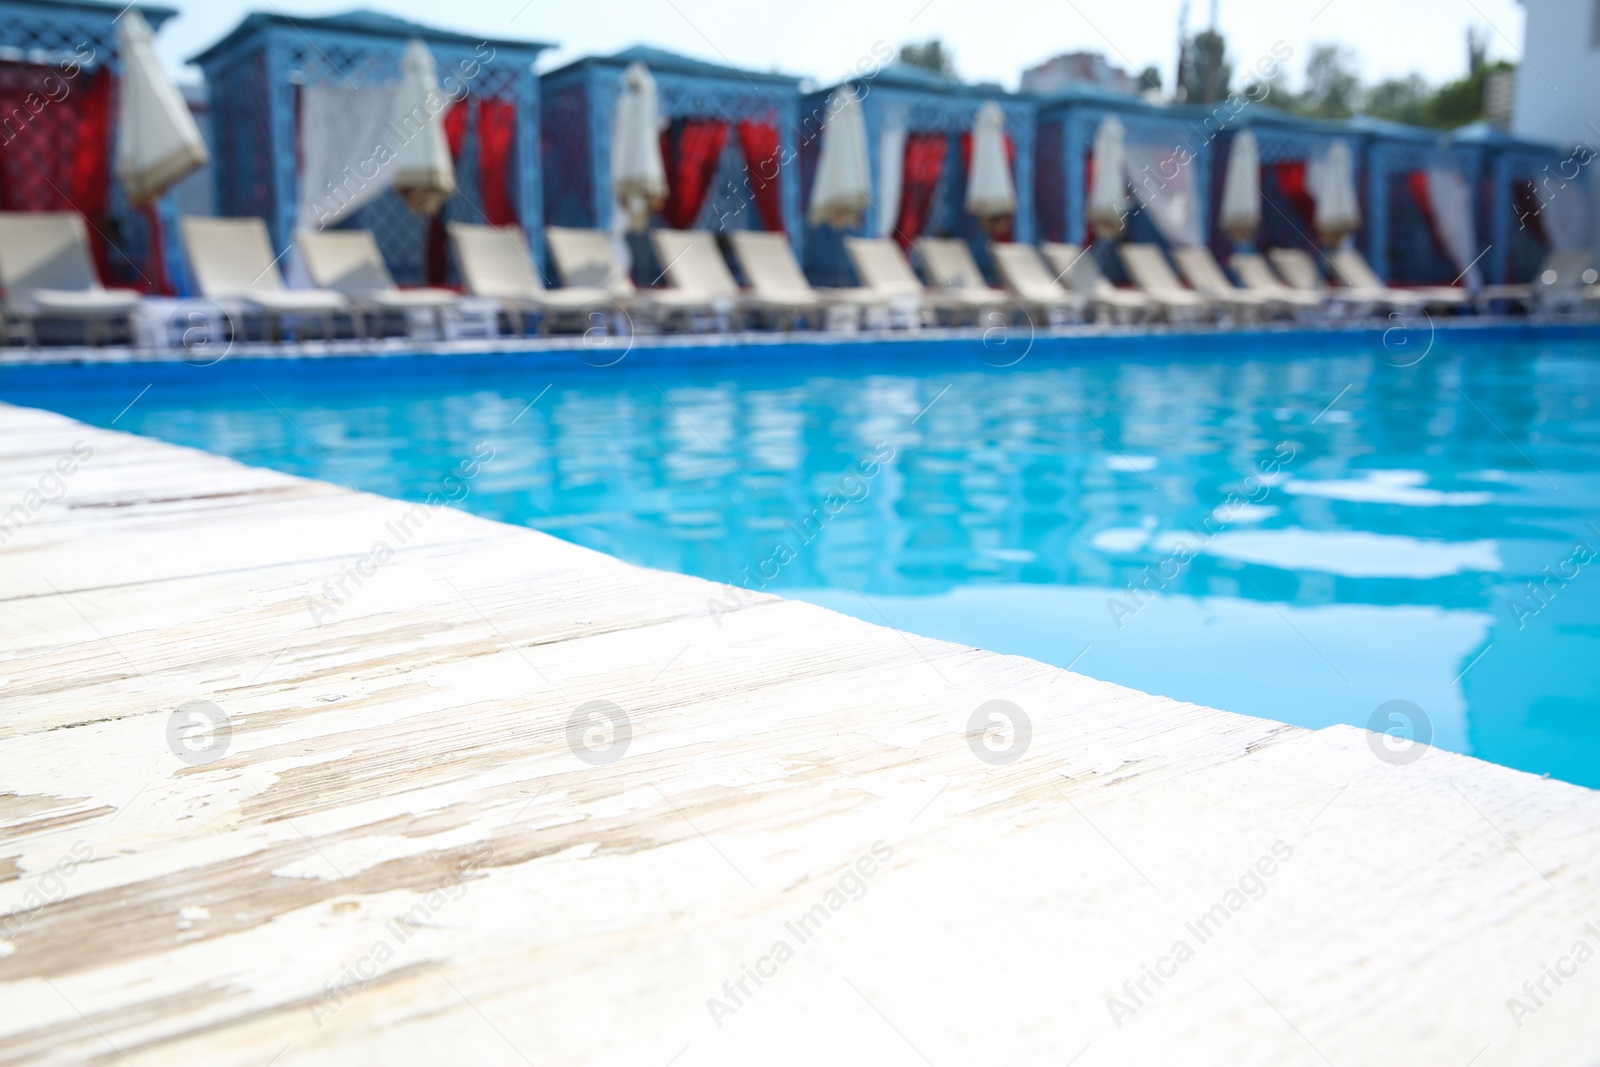 Photo of Outdoor swimming pool with sunbeds at resort on sunny day